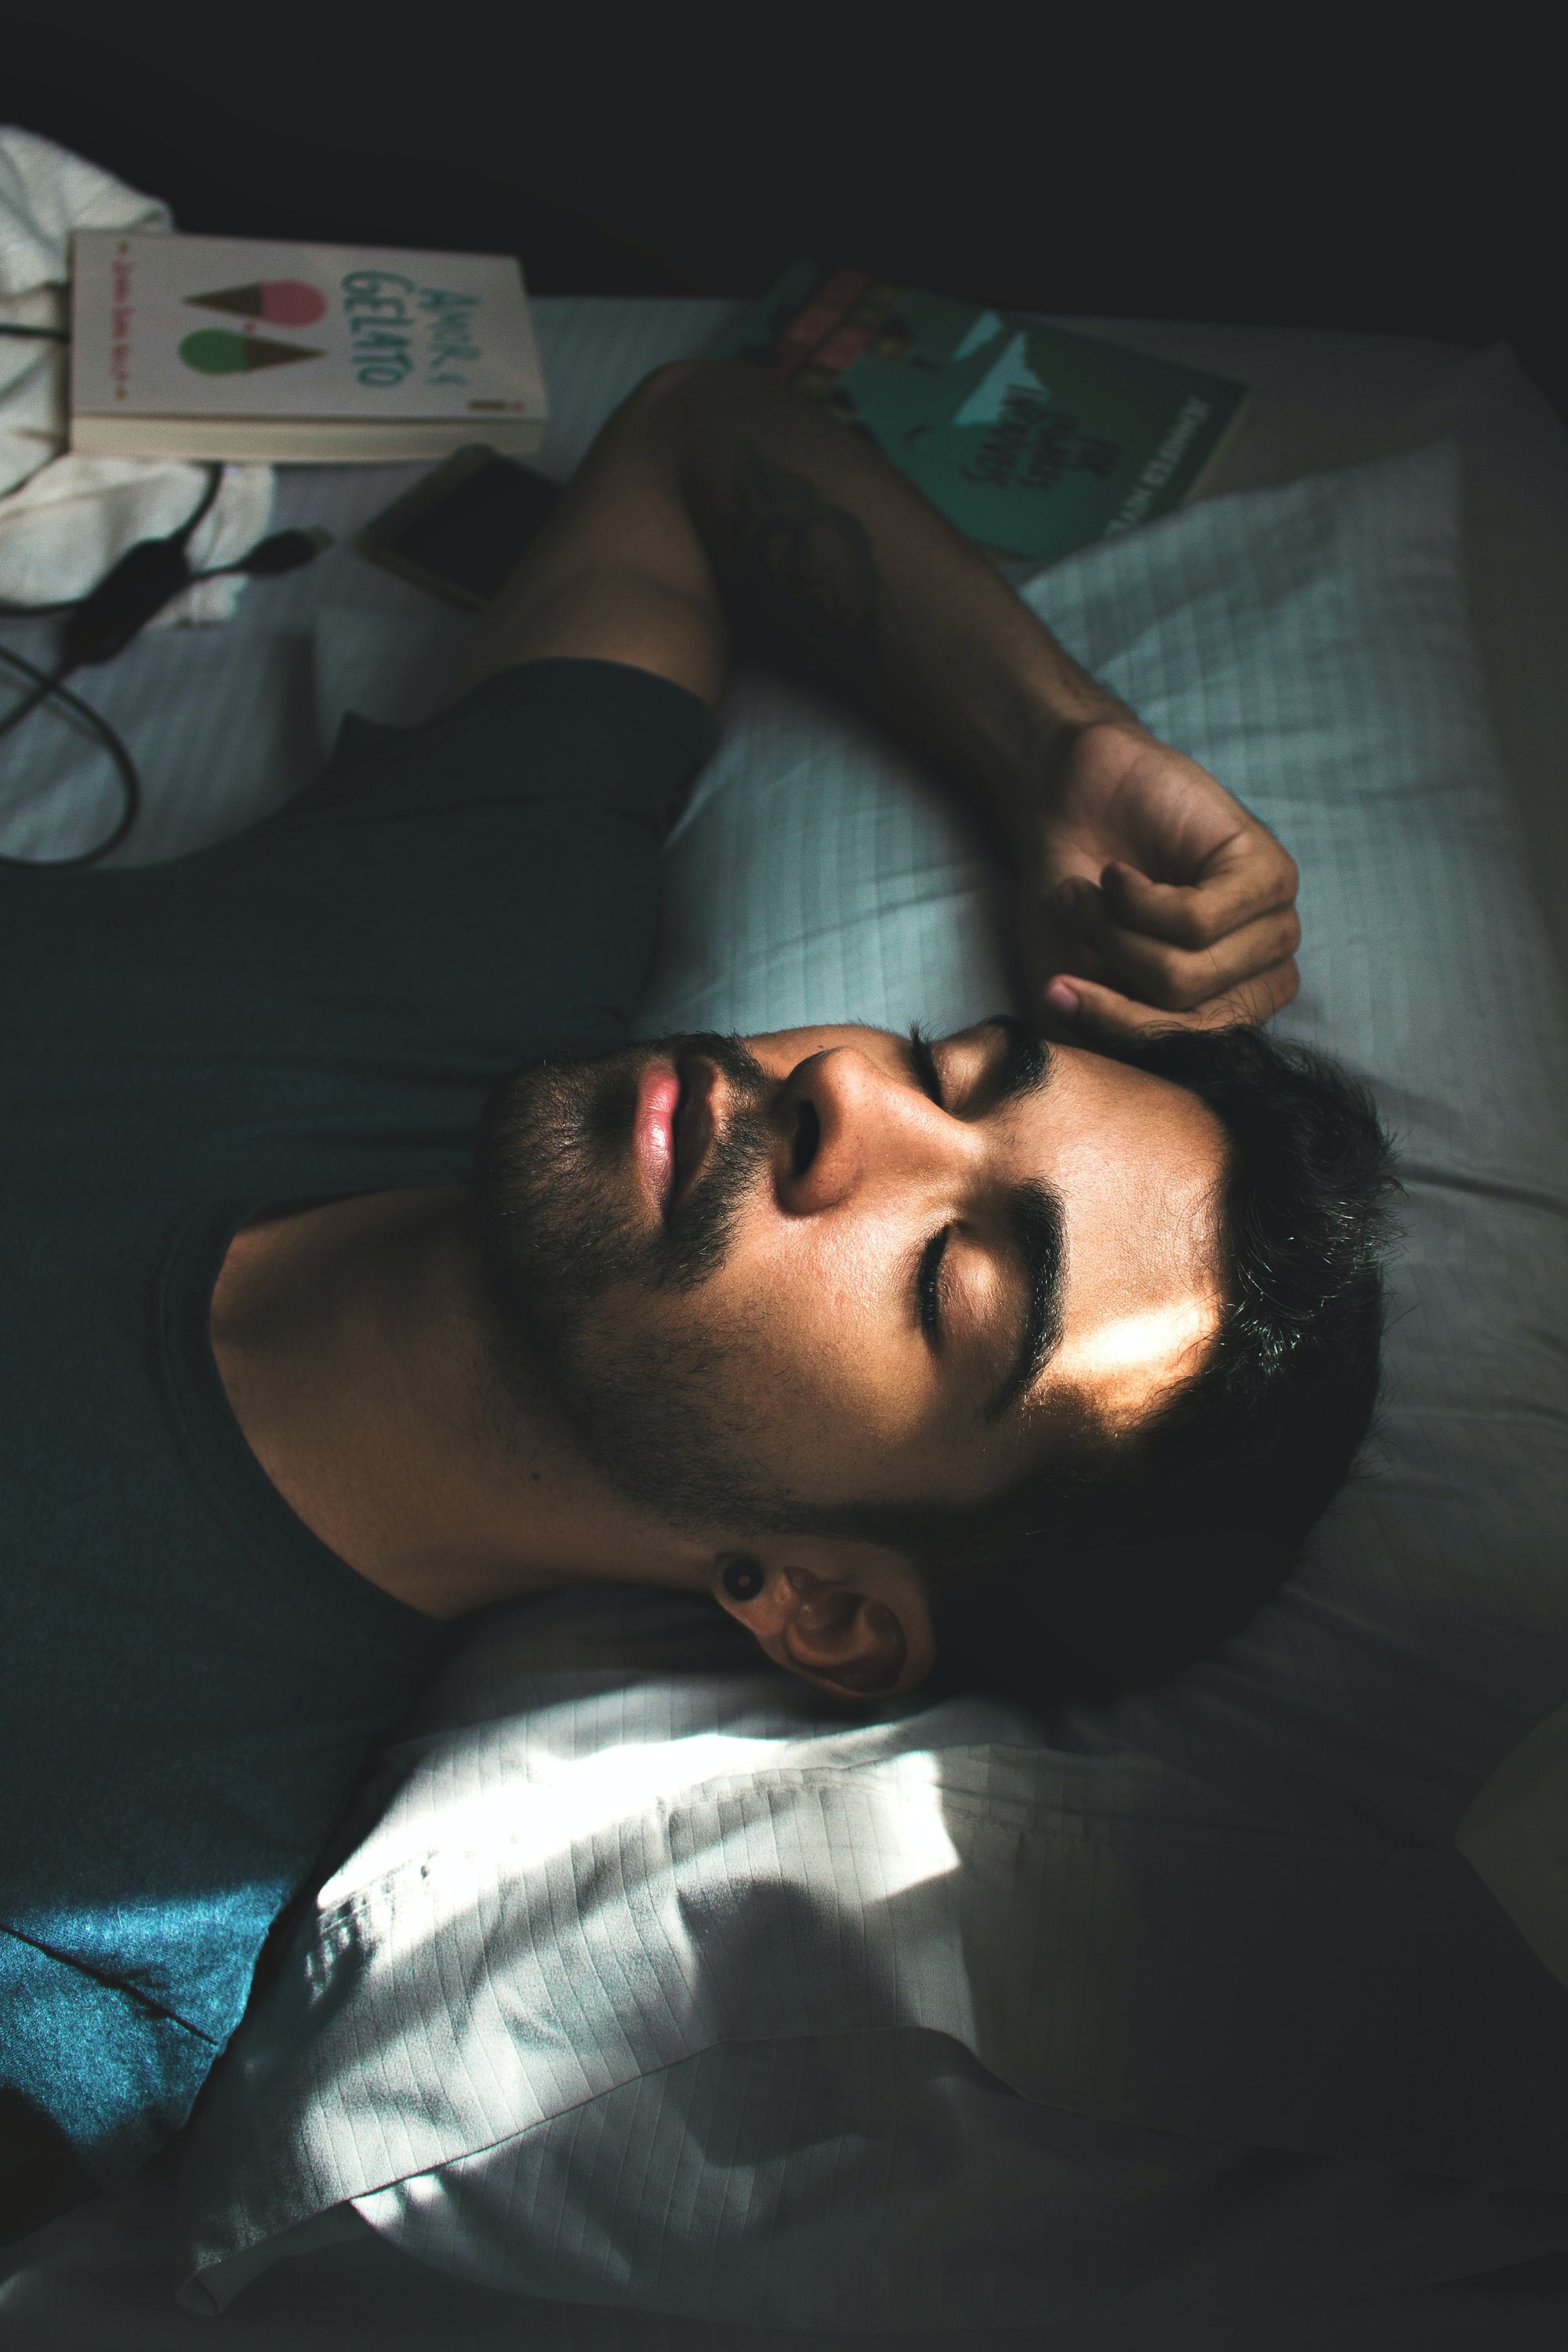 Photo by Lucas Andrade - Man sleeping on a bed